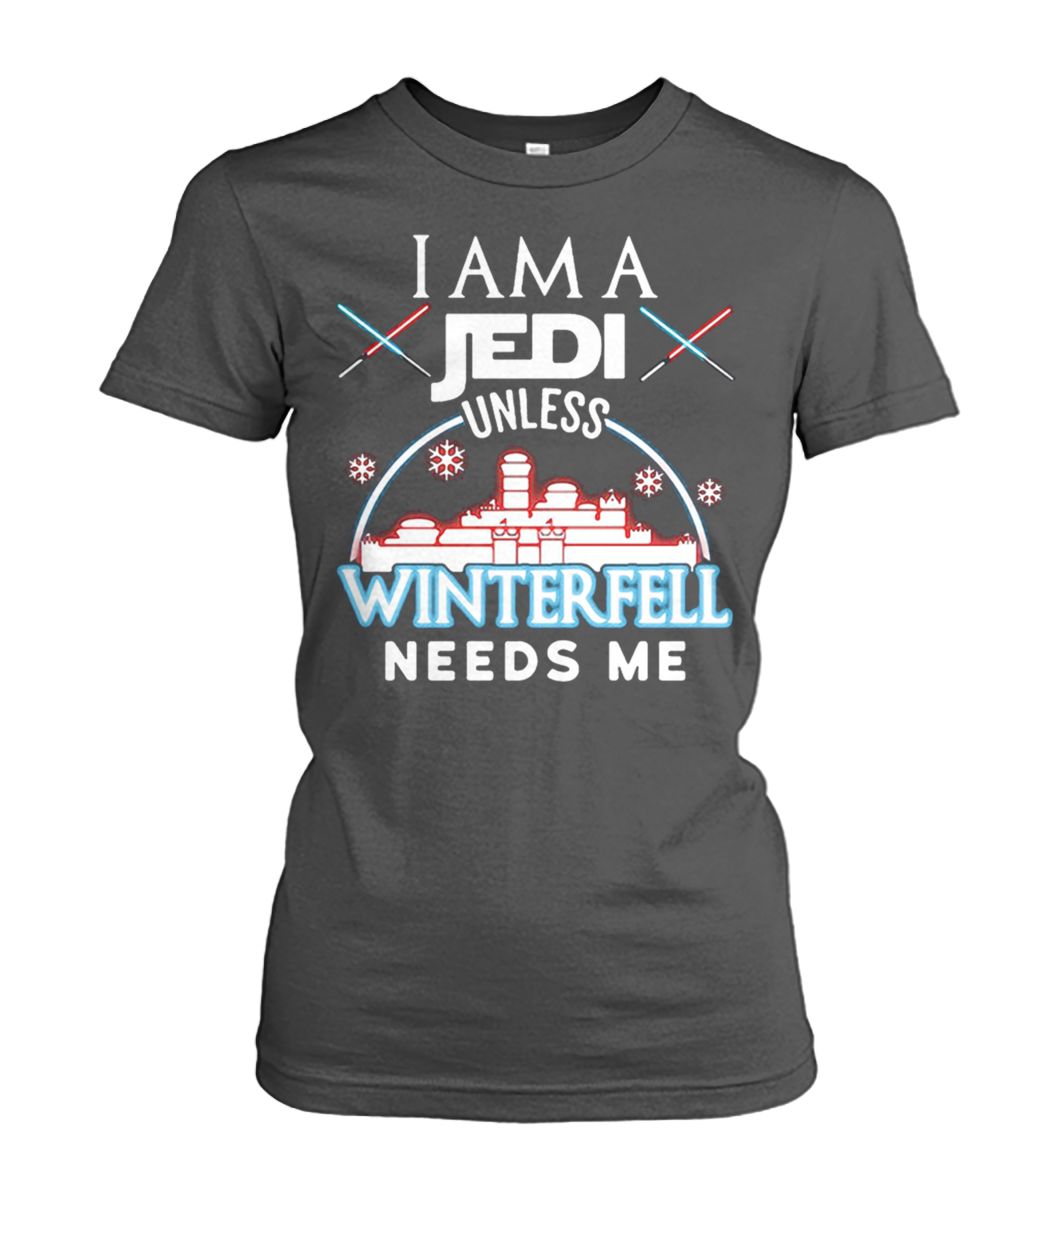 Game of thrones I am a jedi unless winterfell needs me women's crew tee